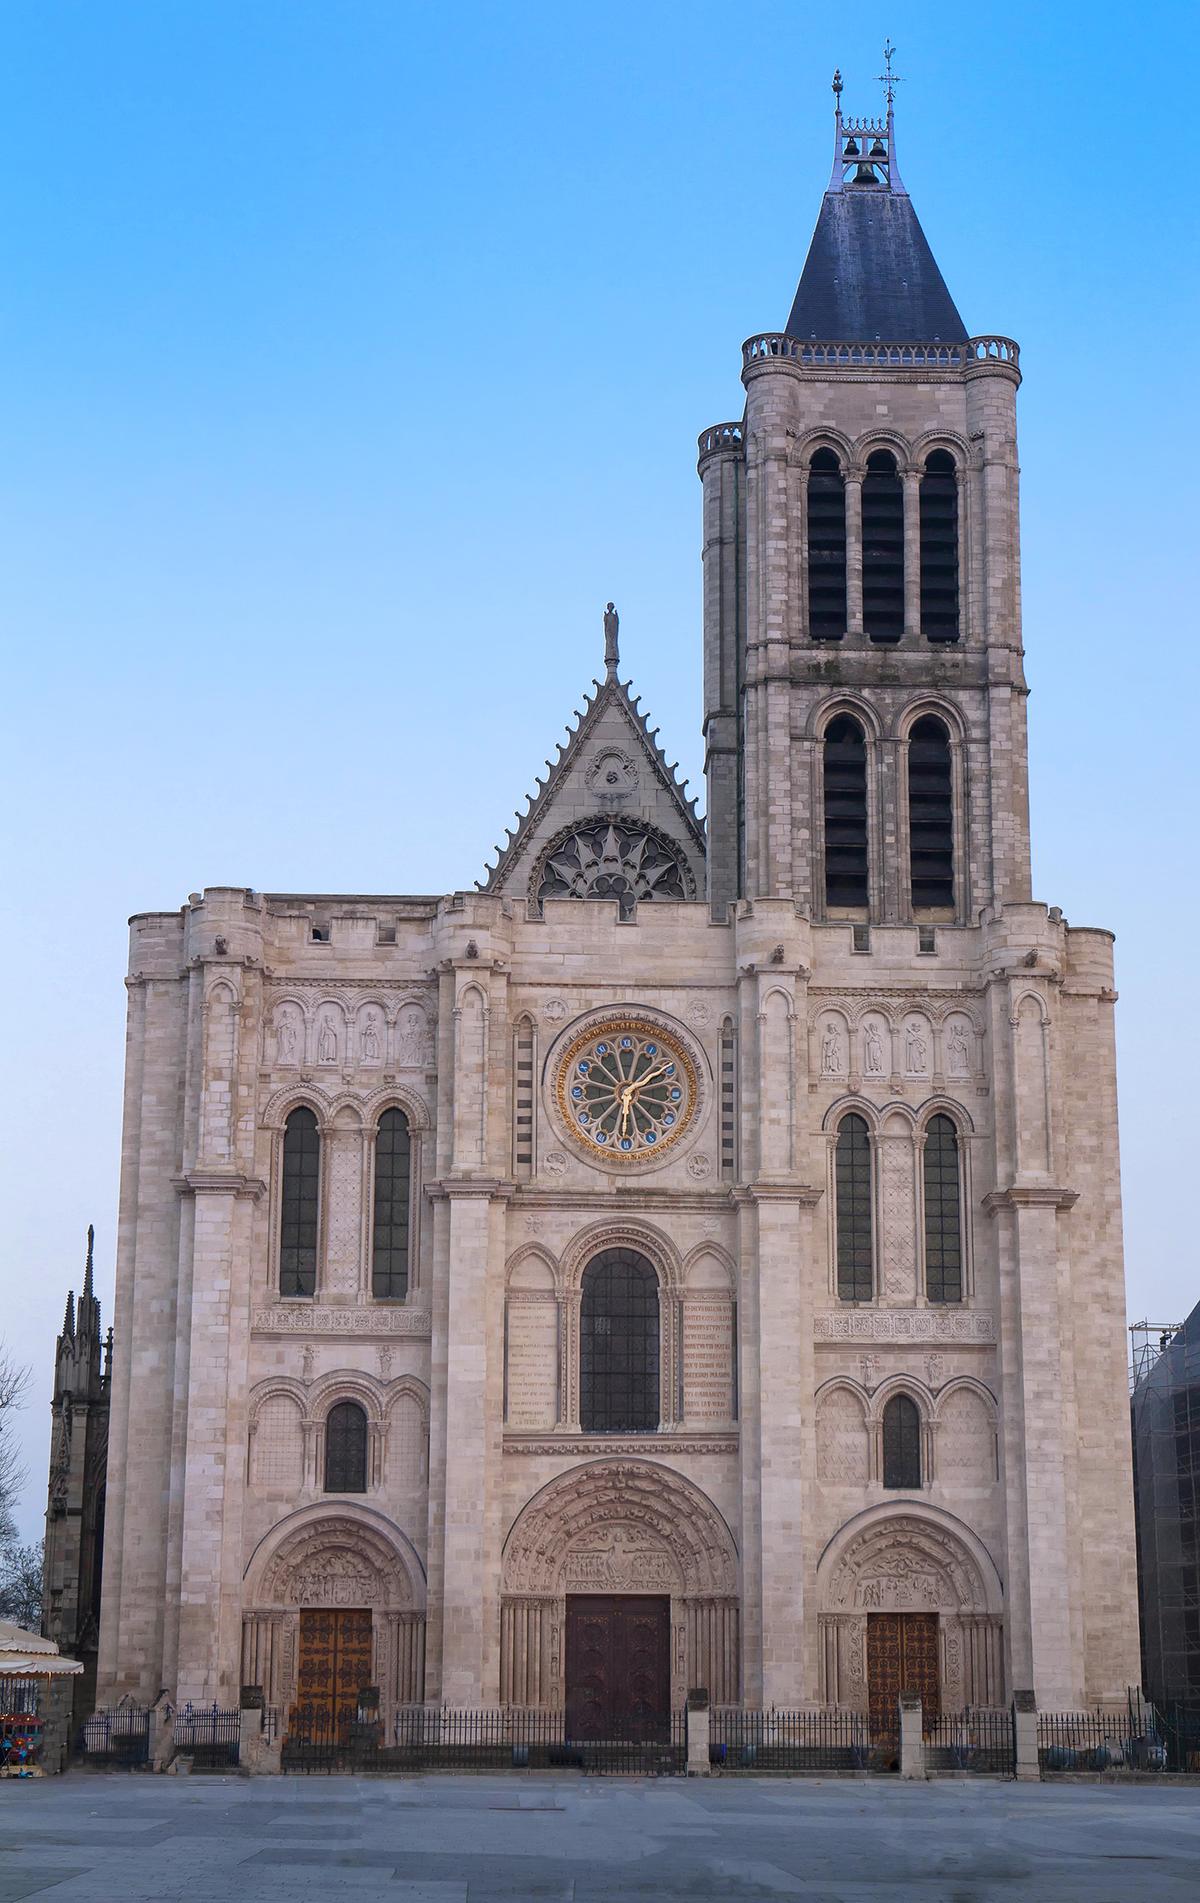 Architecturally significant, the Abbey of Saint-Denis reveals the first use of all of the elements of Gothic architecture and set the standard for cathedrals and churches of medieval Europe. (Petr Kovalenkov/Shutterstock)